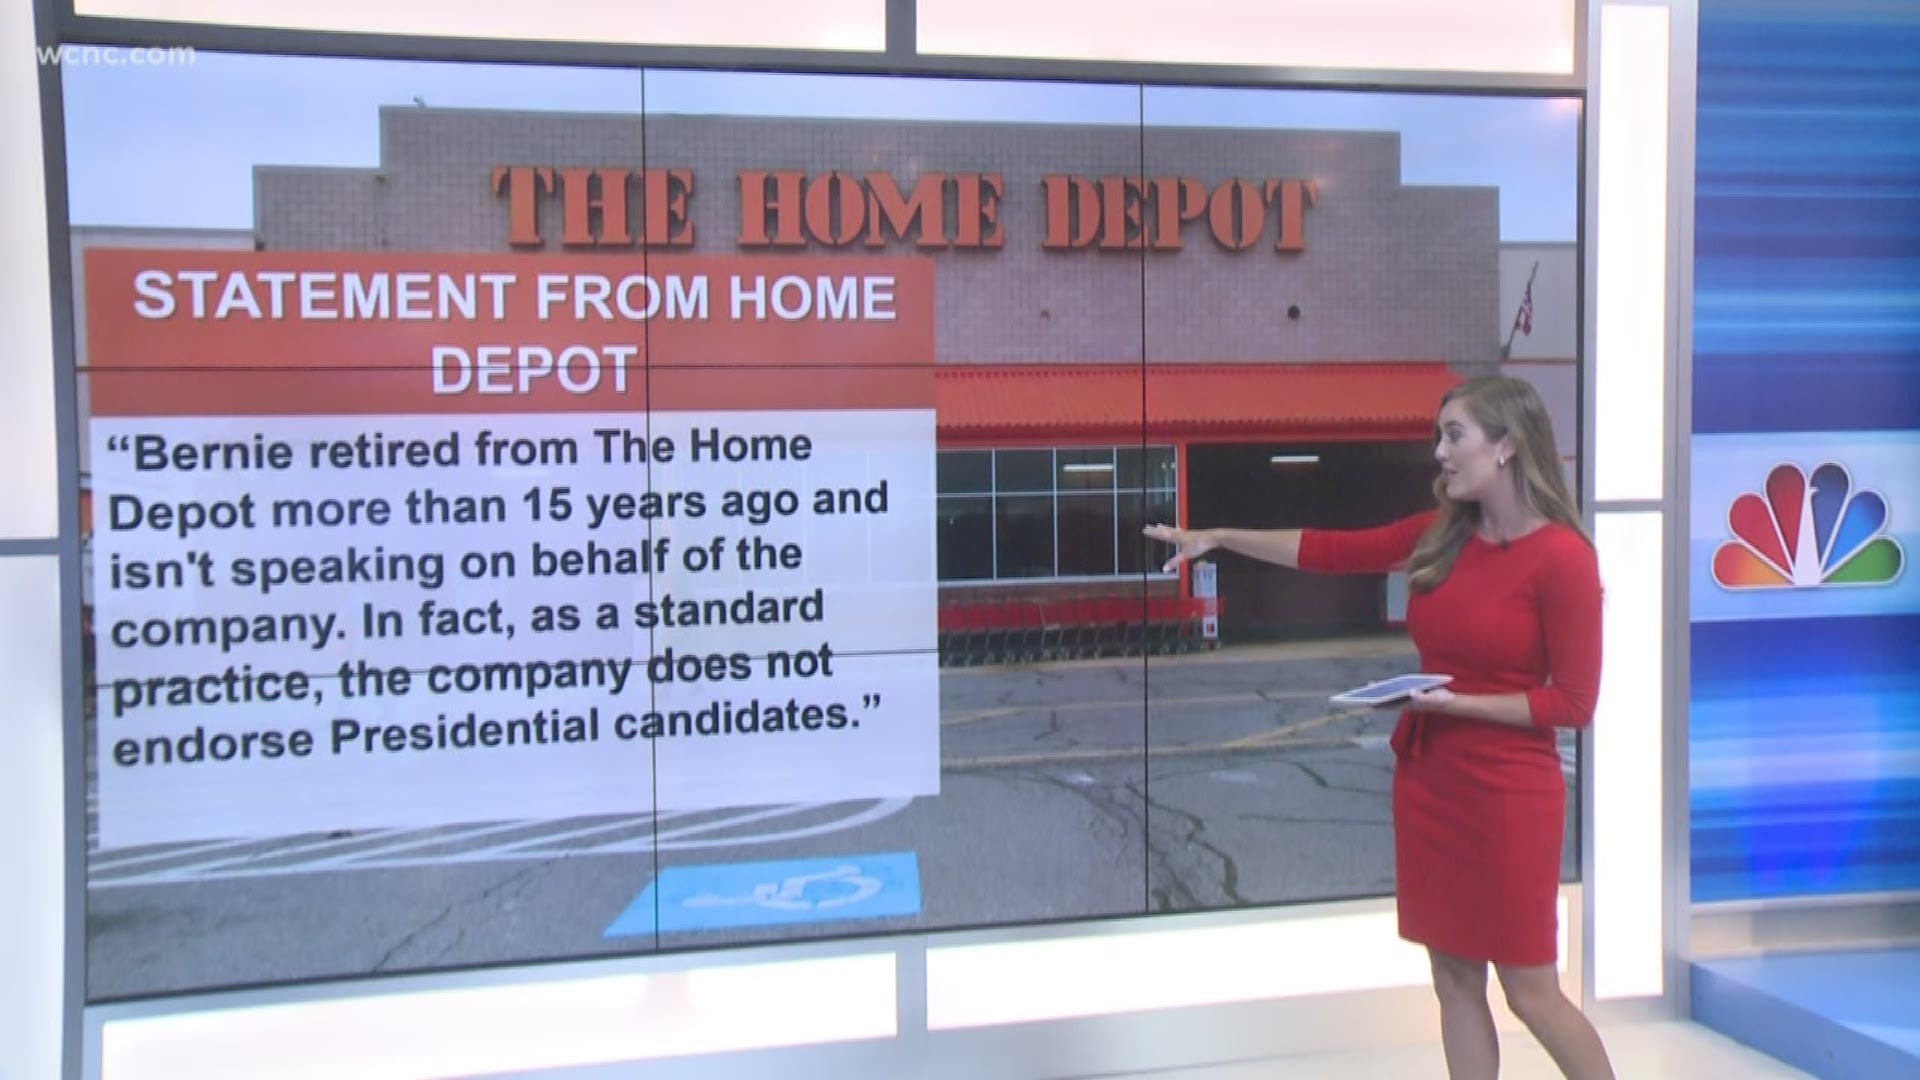 Thousands of people threatened to boycott Home Depot after Bernie Marcus, one of the company's founders, said he will support President Donald Trump's re-election campaign in 2020.